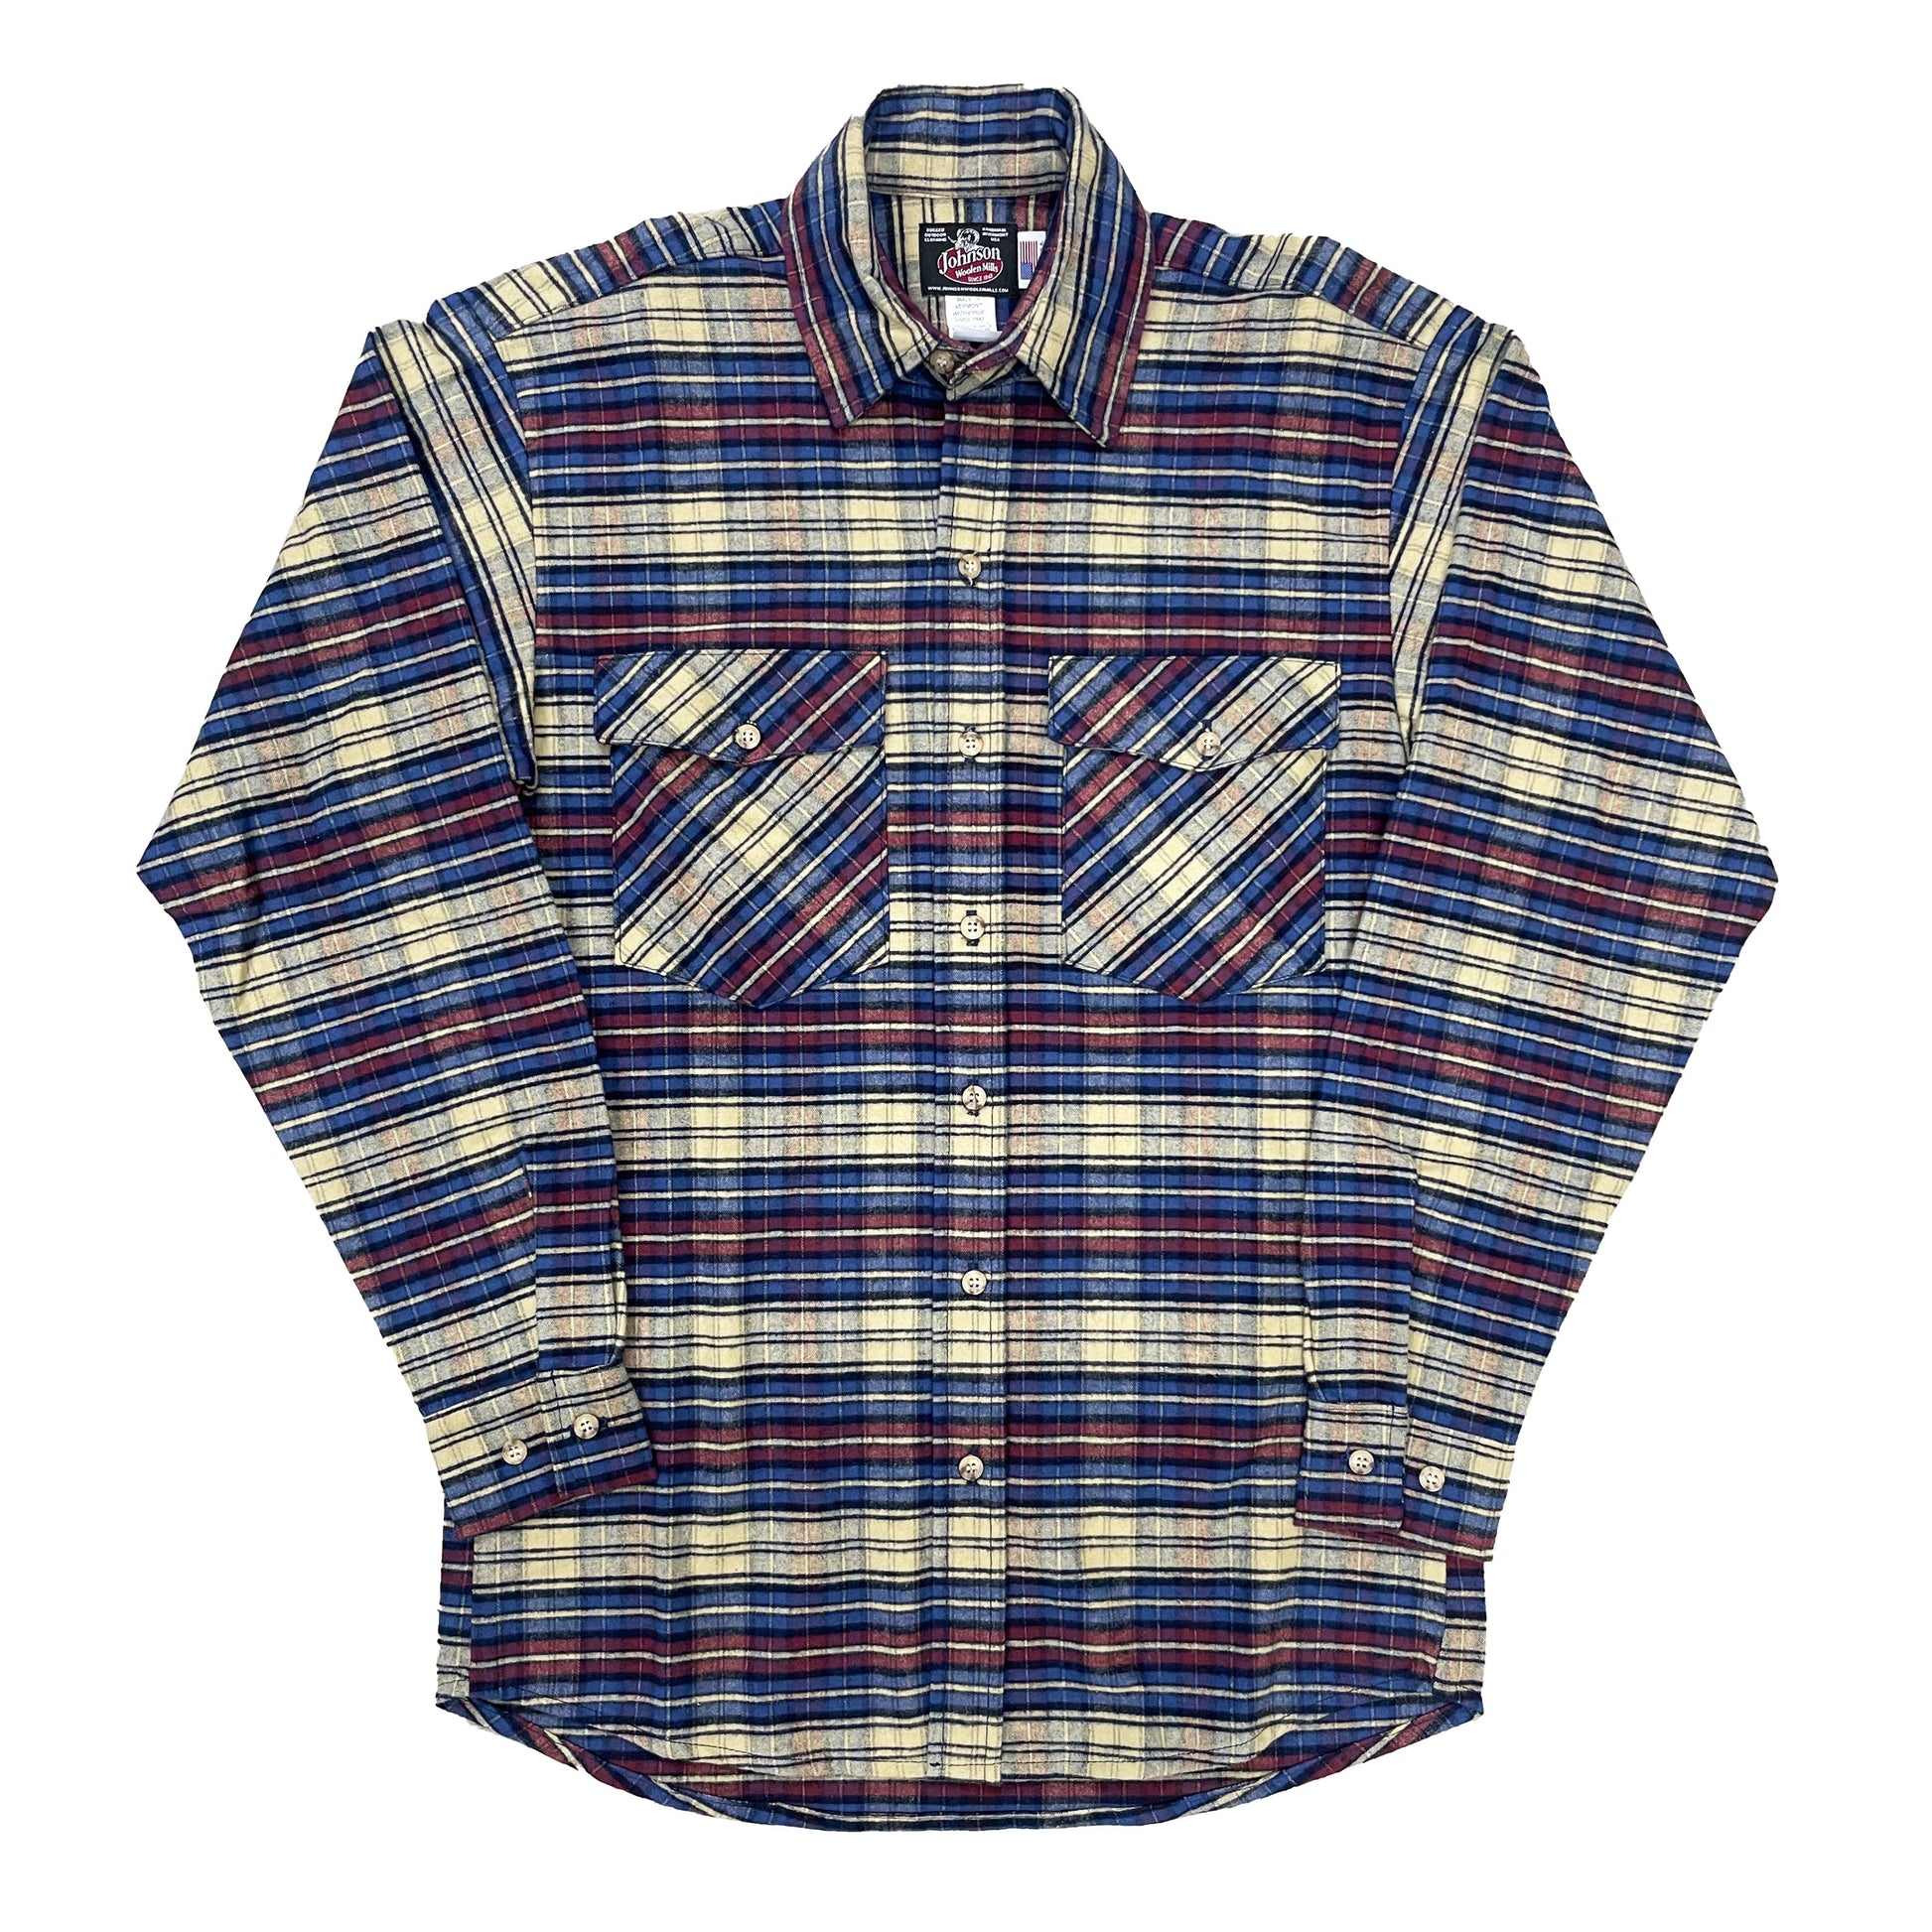 Flannel Button down shirt. Blue, Maroon, and Tan.